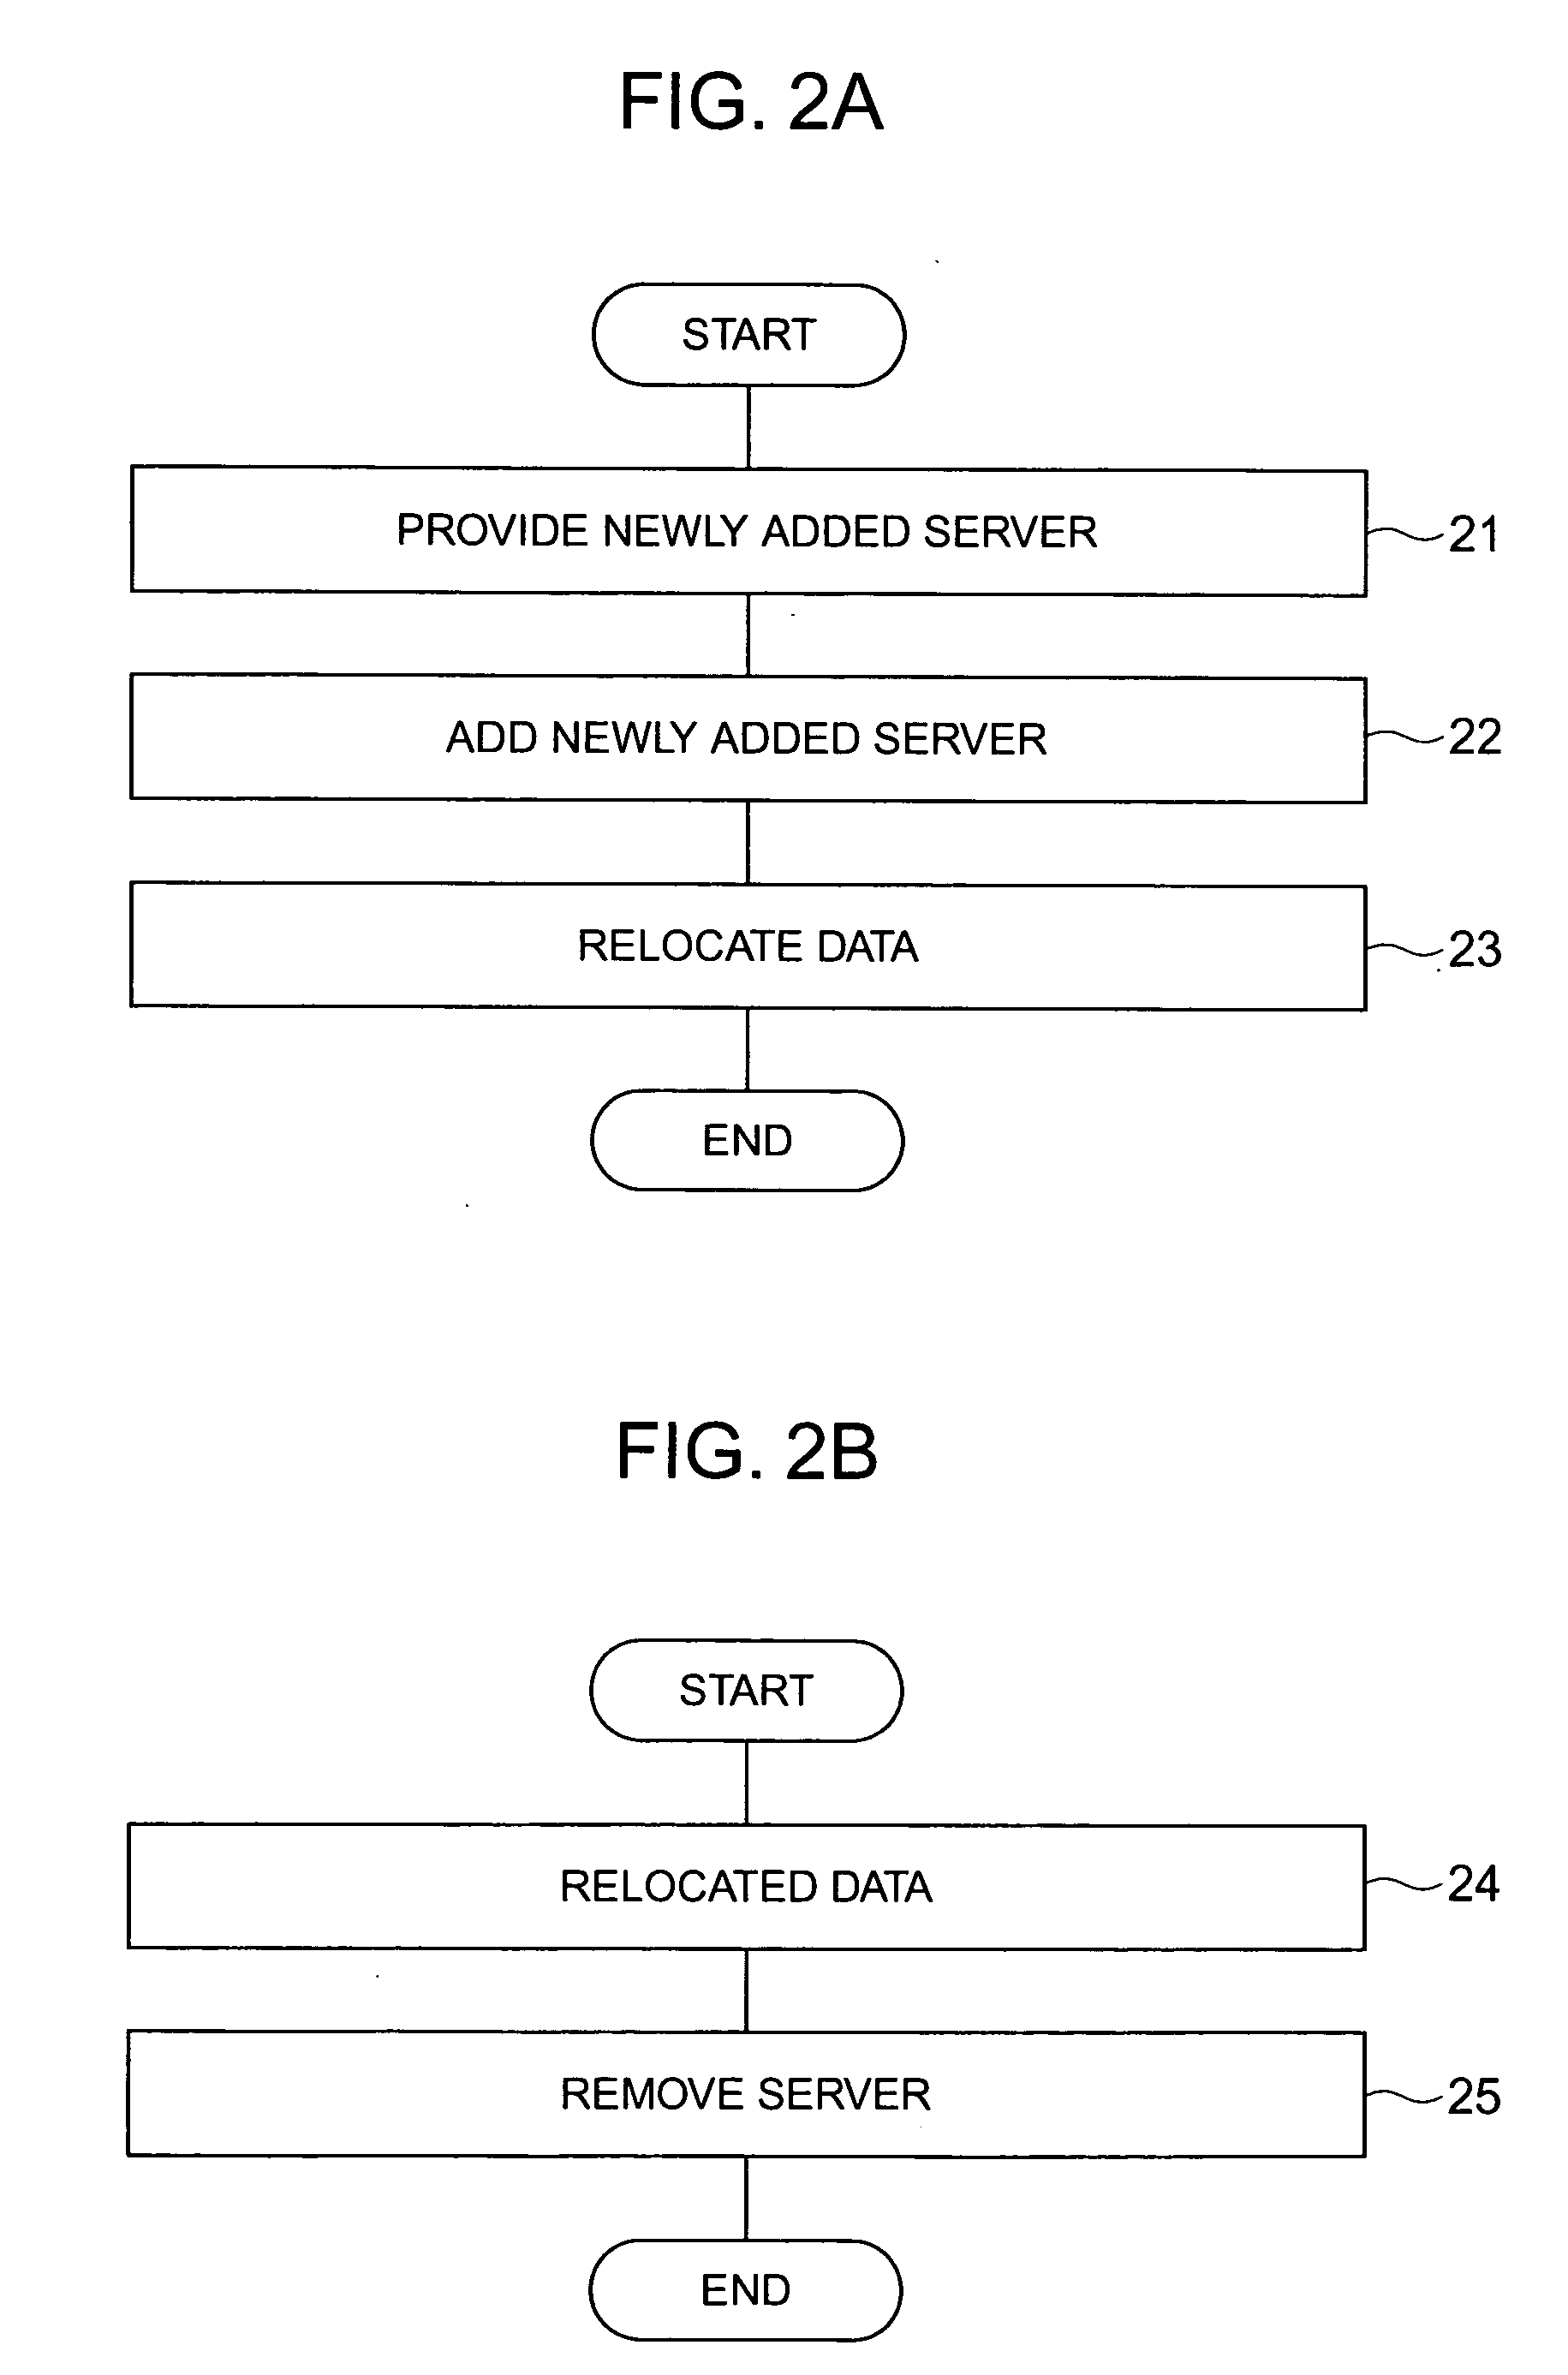 Method of changing system configuration in shared-nothing database management system